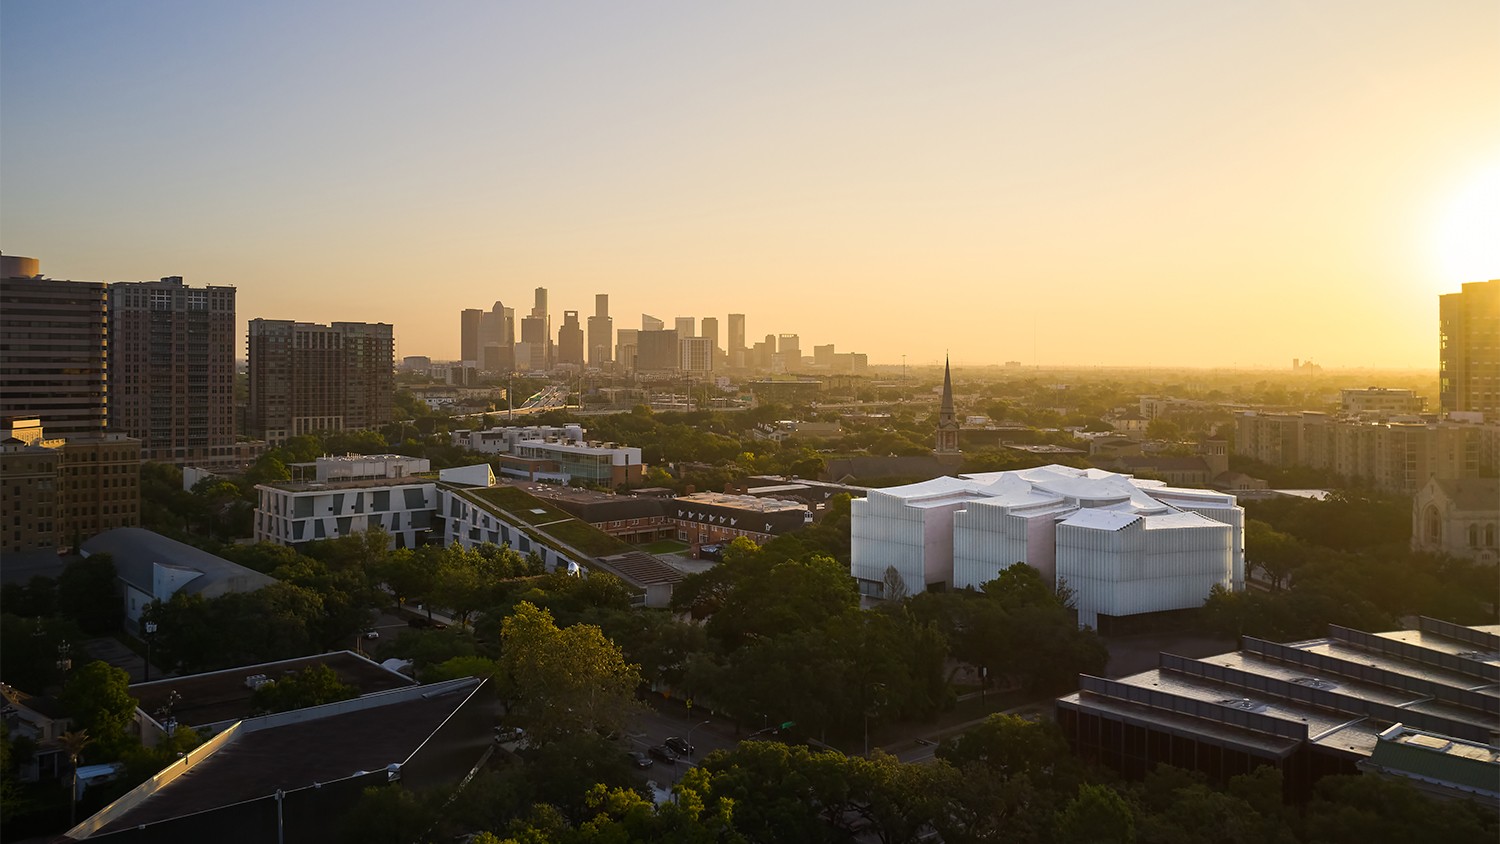 MUSEUM OF FINE ARTS HOUSTON CAMPUS EXPANSION (MFAH